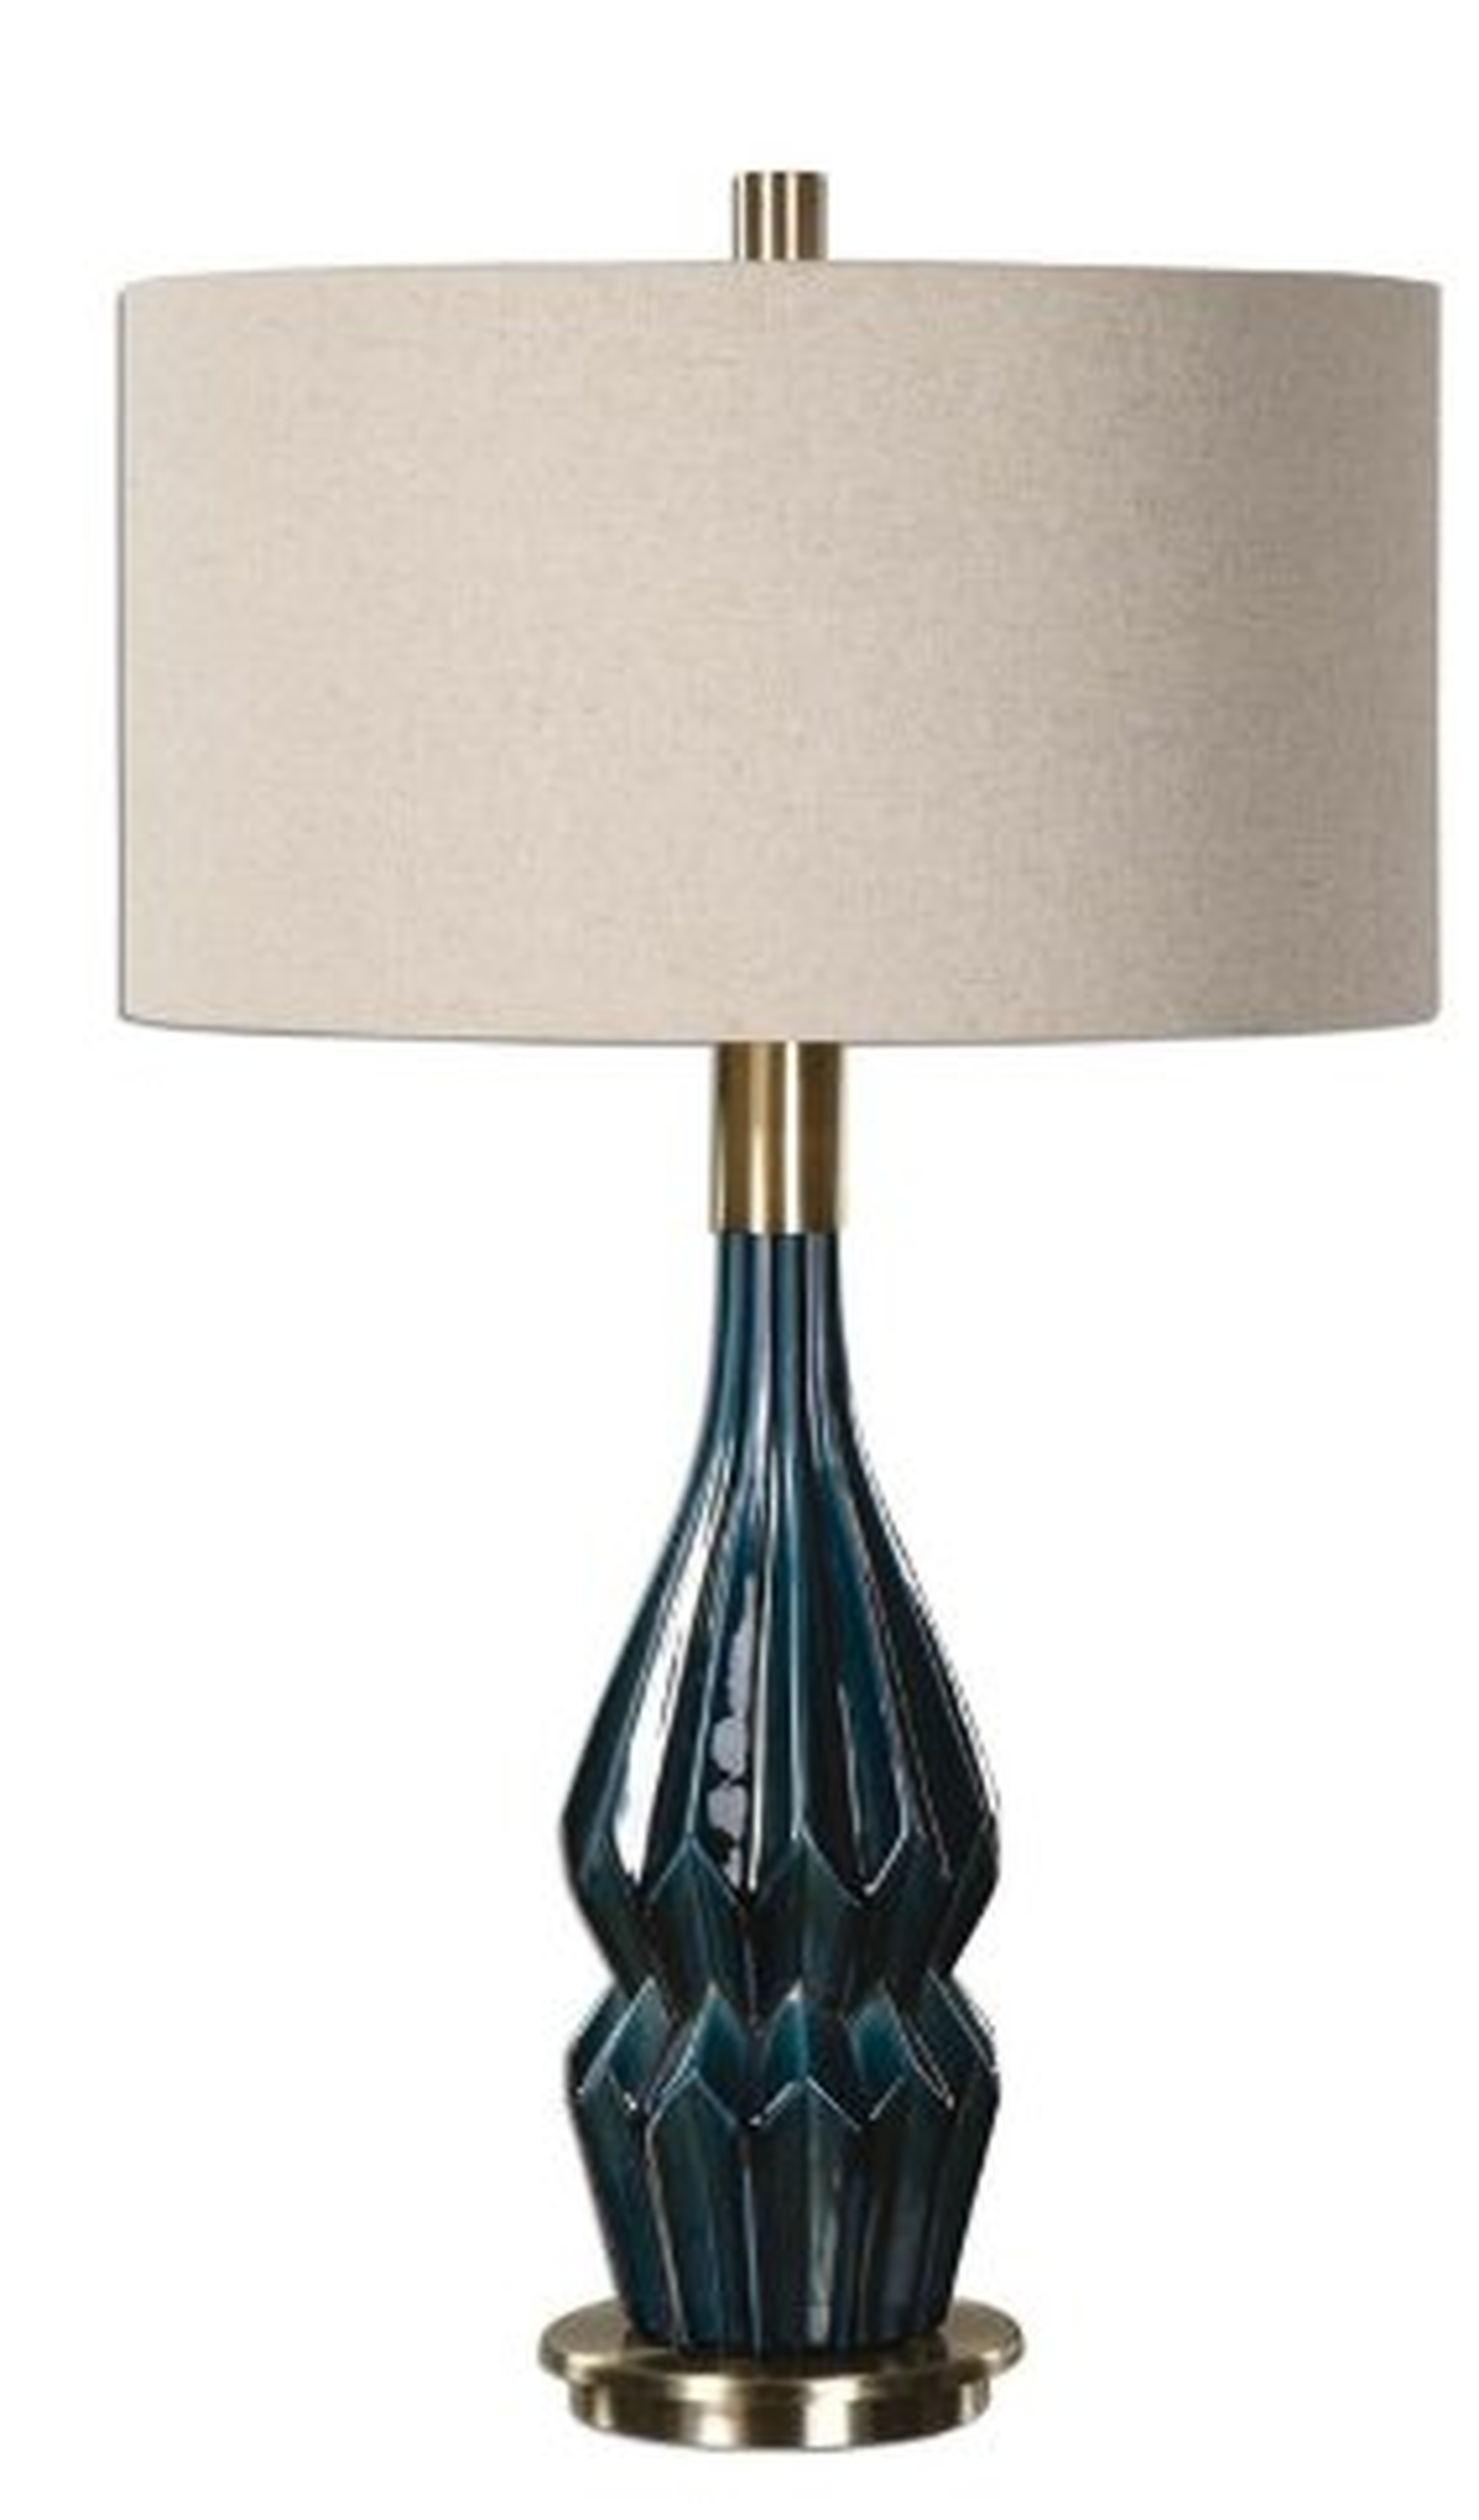 PRUSSIAN TABLE LAMP - Hudsonhill Foundry